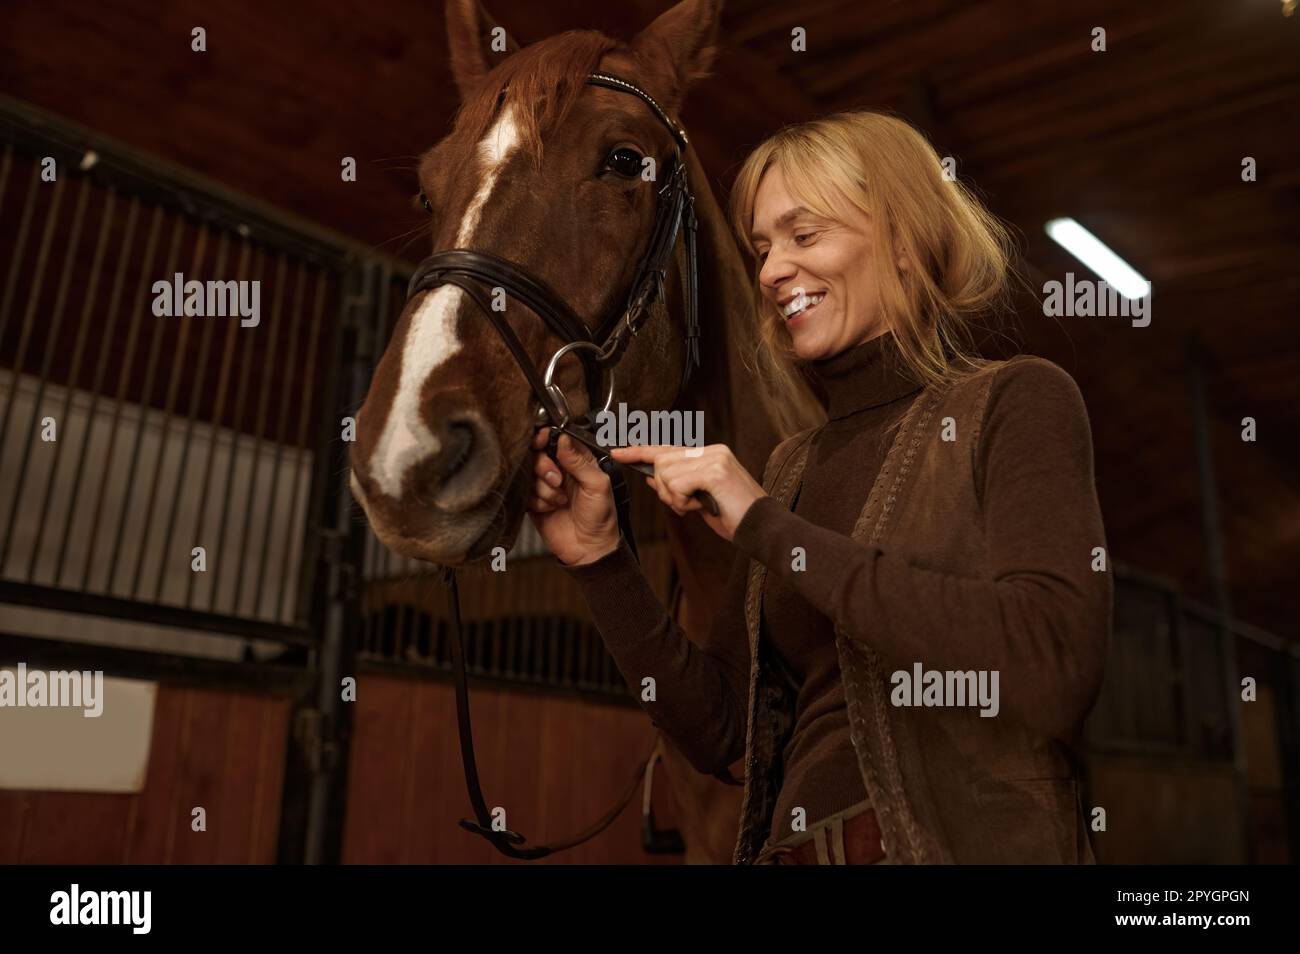 Woman rider putting bridle horsey muzzle while standing in stable Stock Photo